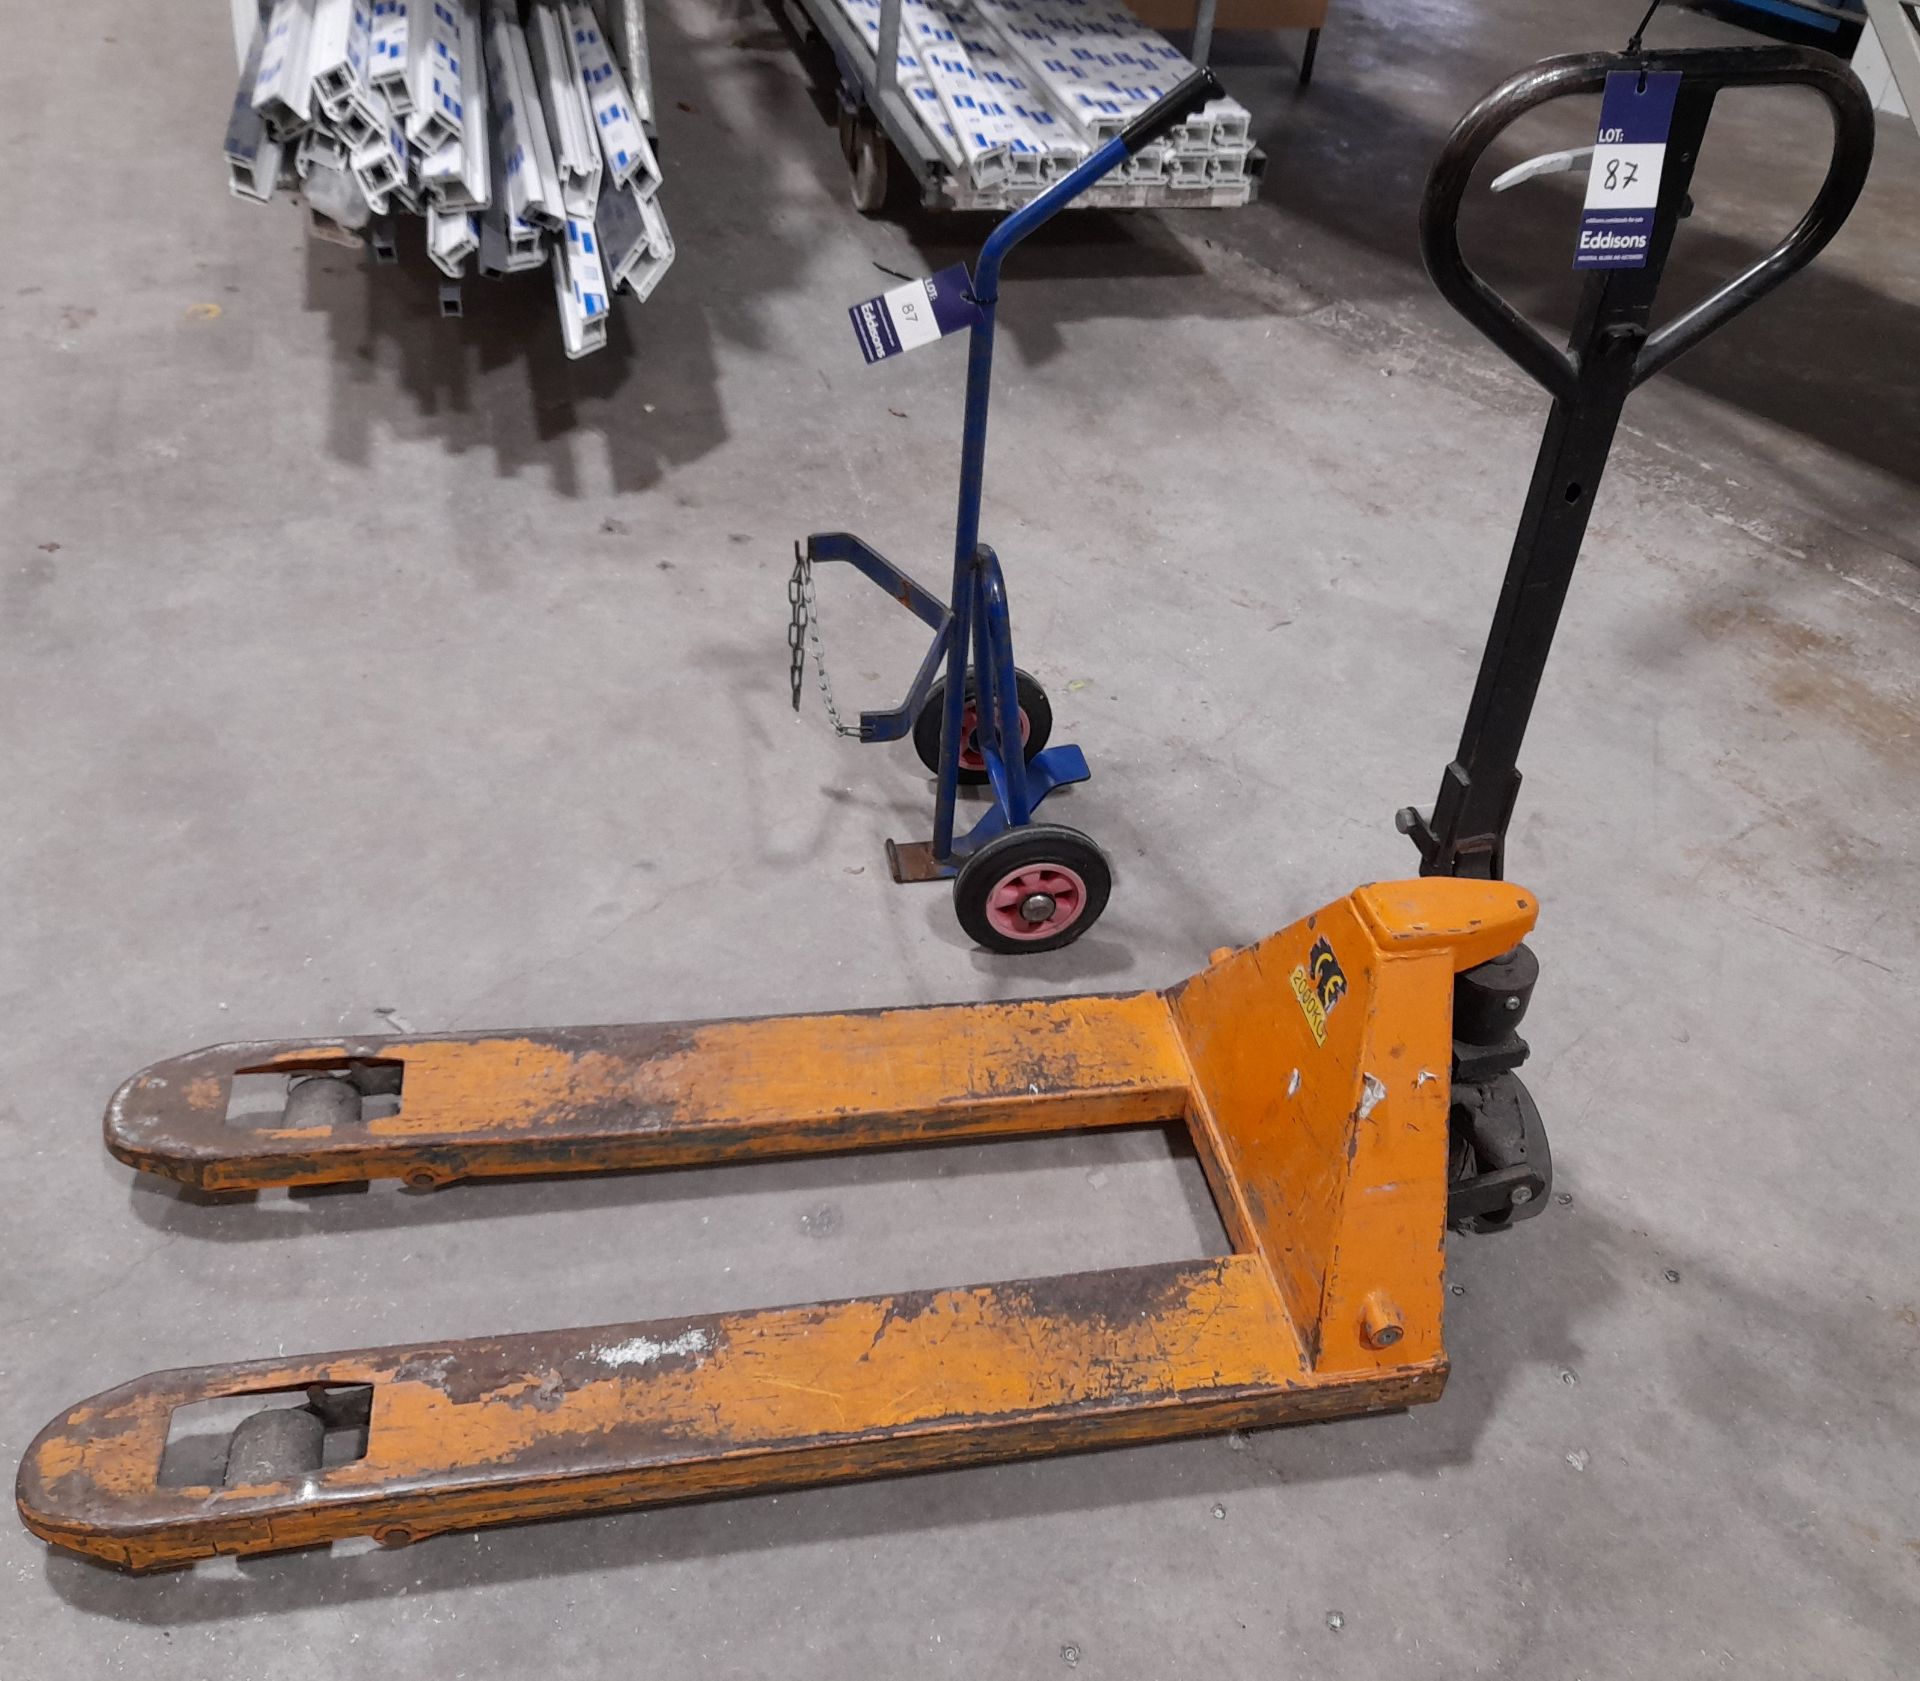 2000KG Capacity unbadged pallet truck, and single